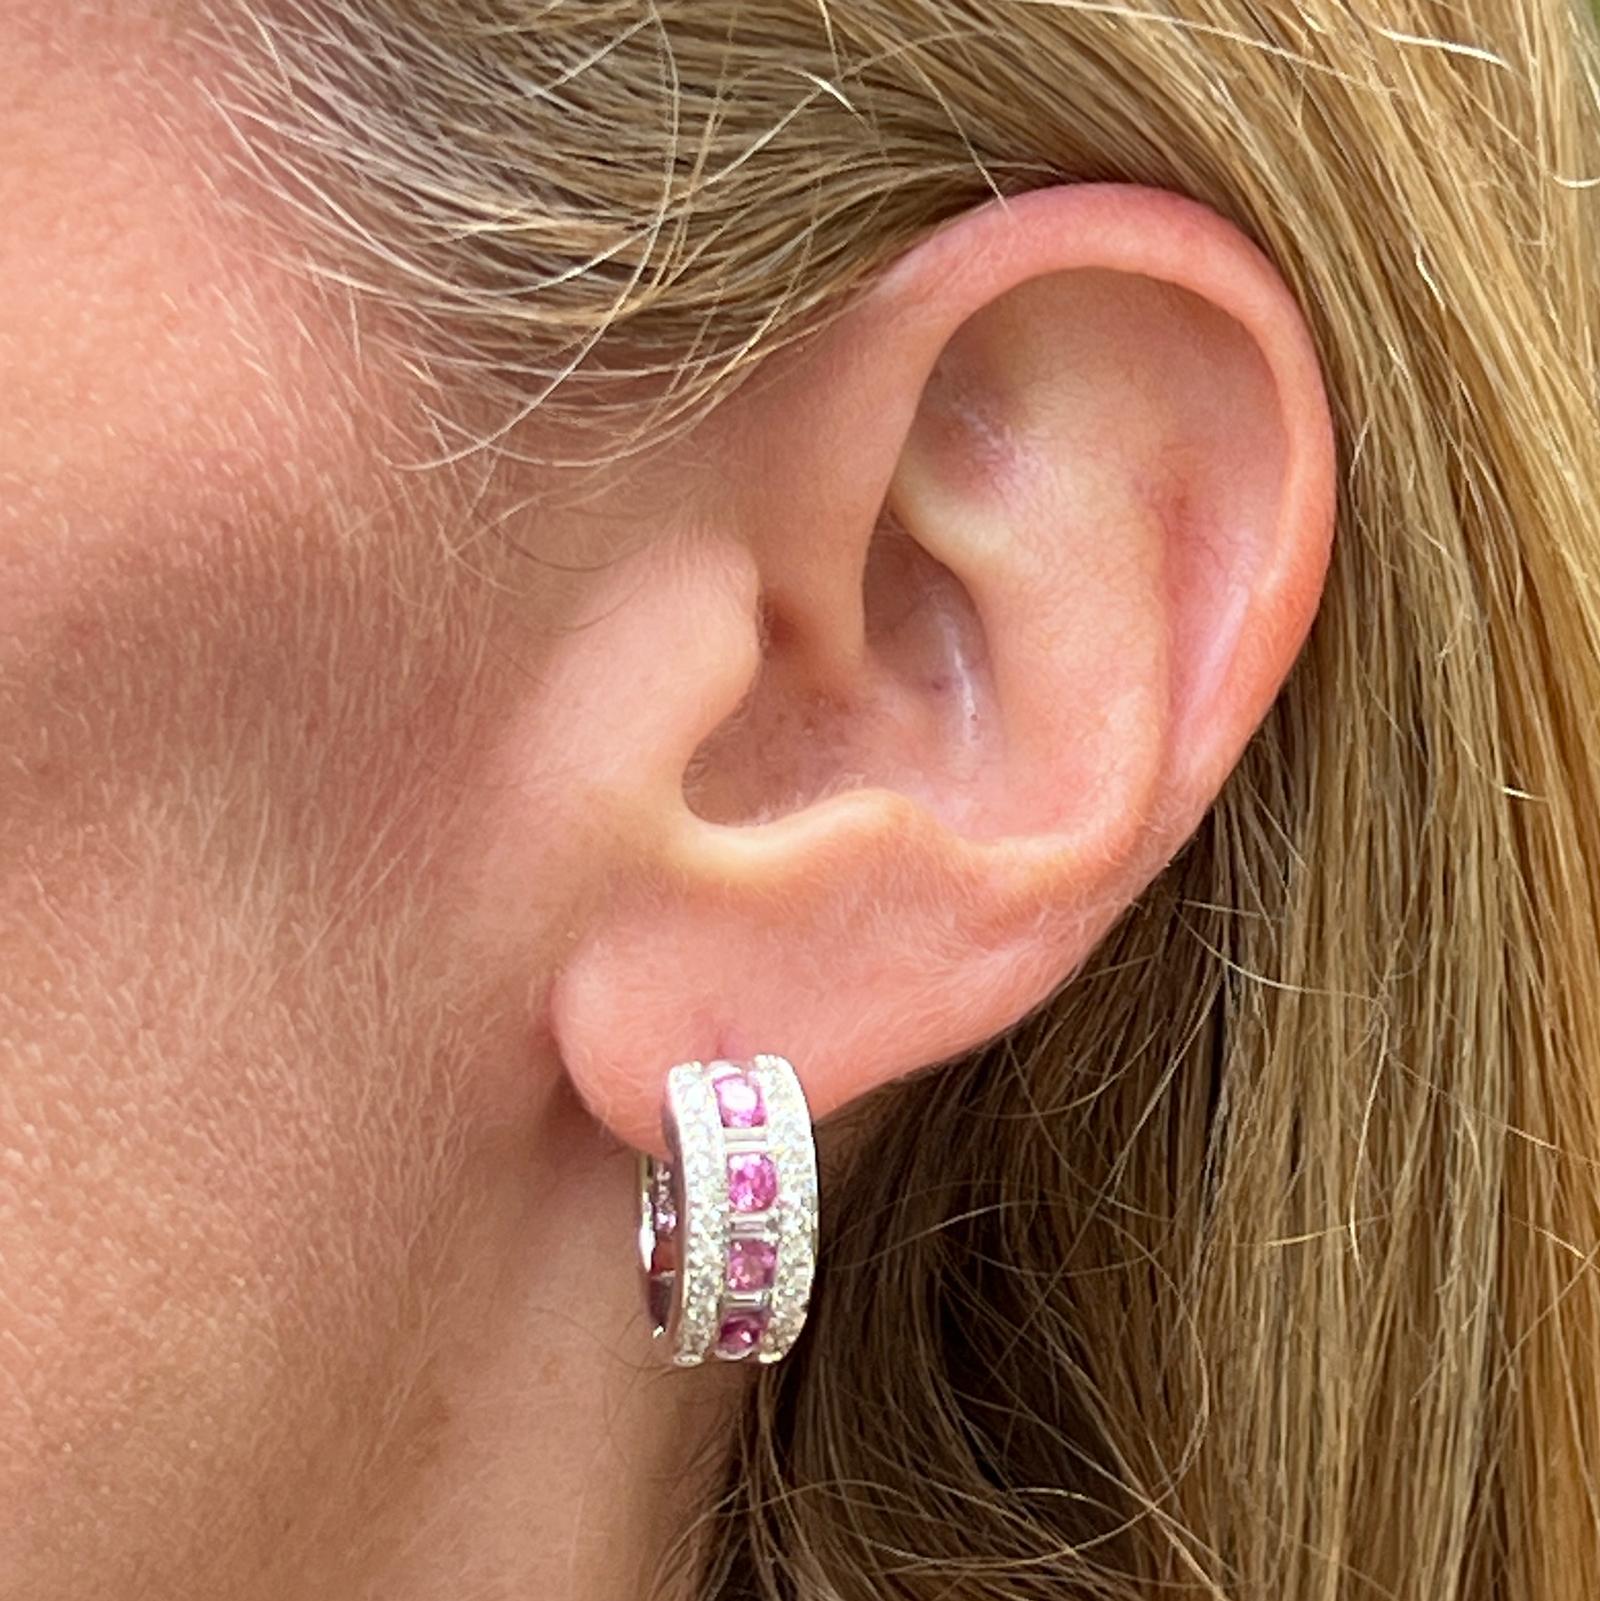 Pink sapphire diamond modern hoop earrings crafted in 18 karat white gold. The hoops feature 8 round pink sapphire gemstones separated by round brilliant and baguette cut diamonds weighing approximately 1.00 carat total weight. The diamonds are